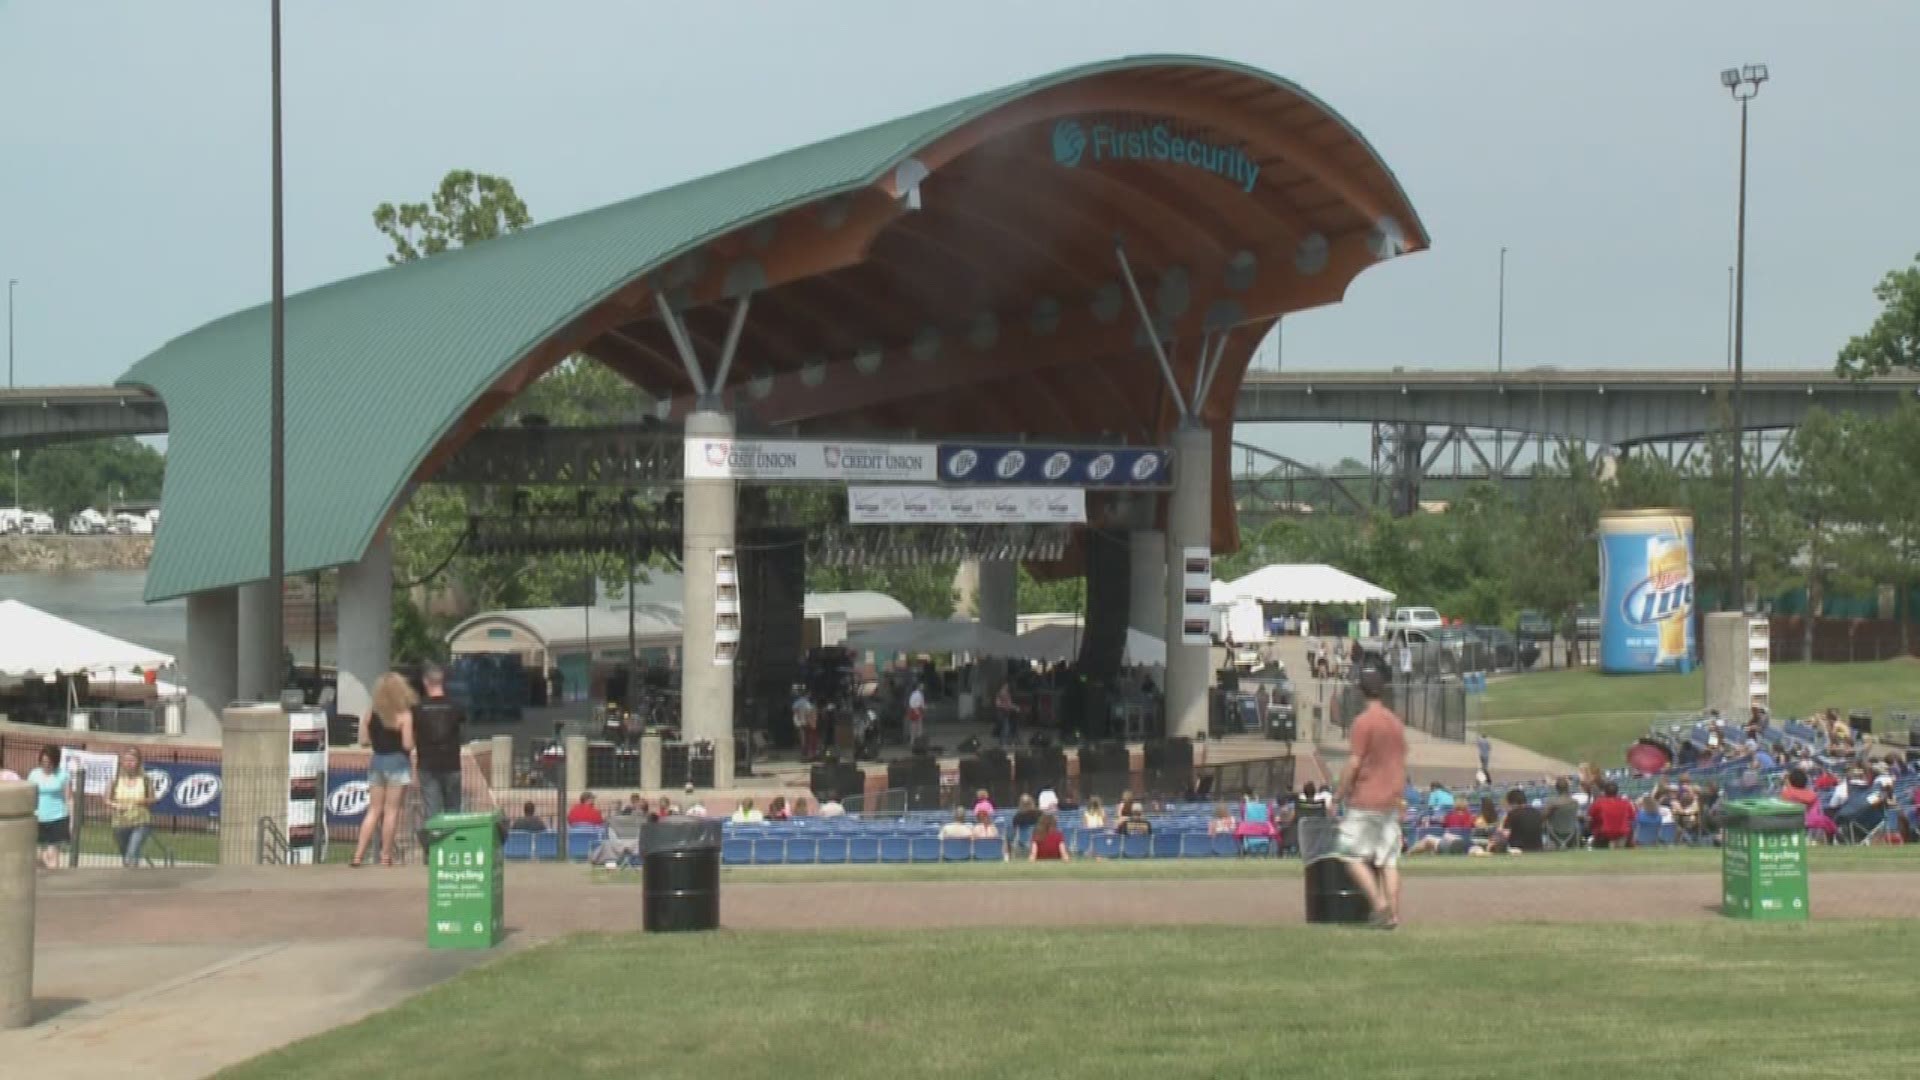 Cage the Elephant hits the stage at Riverfest, loves to play in Arkansas